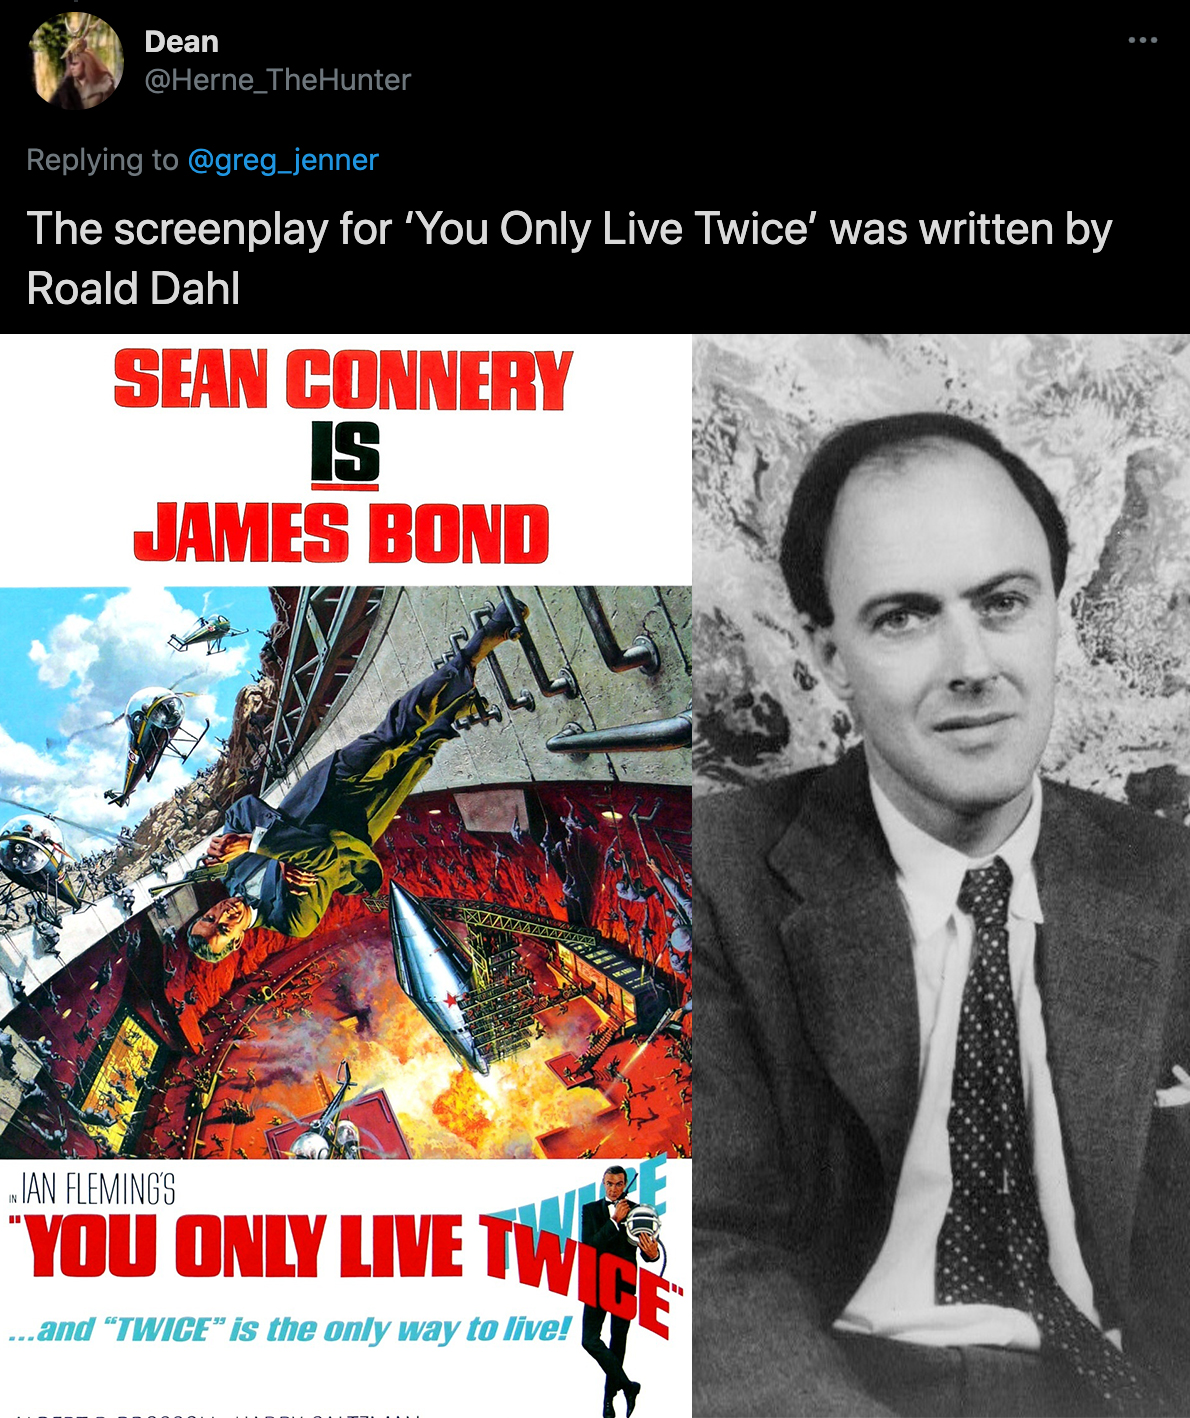 cool facts - The screenplay for 'You Only Live Twice' was written by Roald Dahl